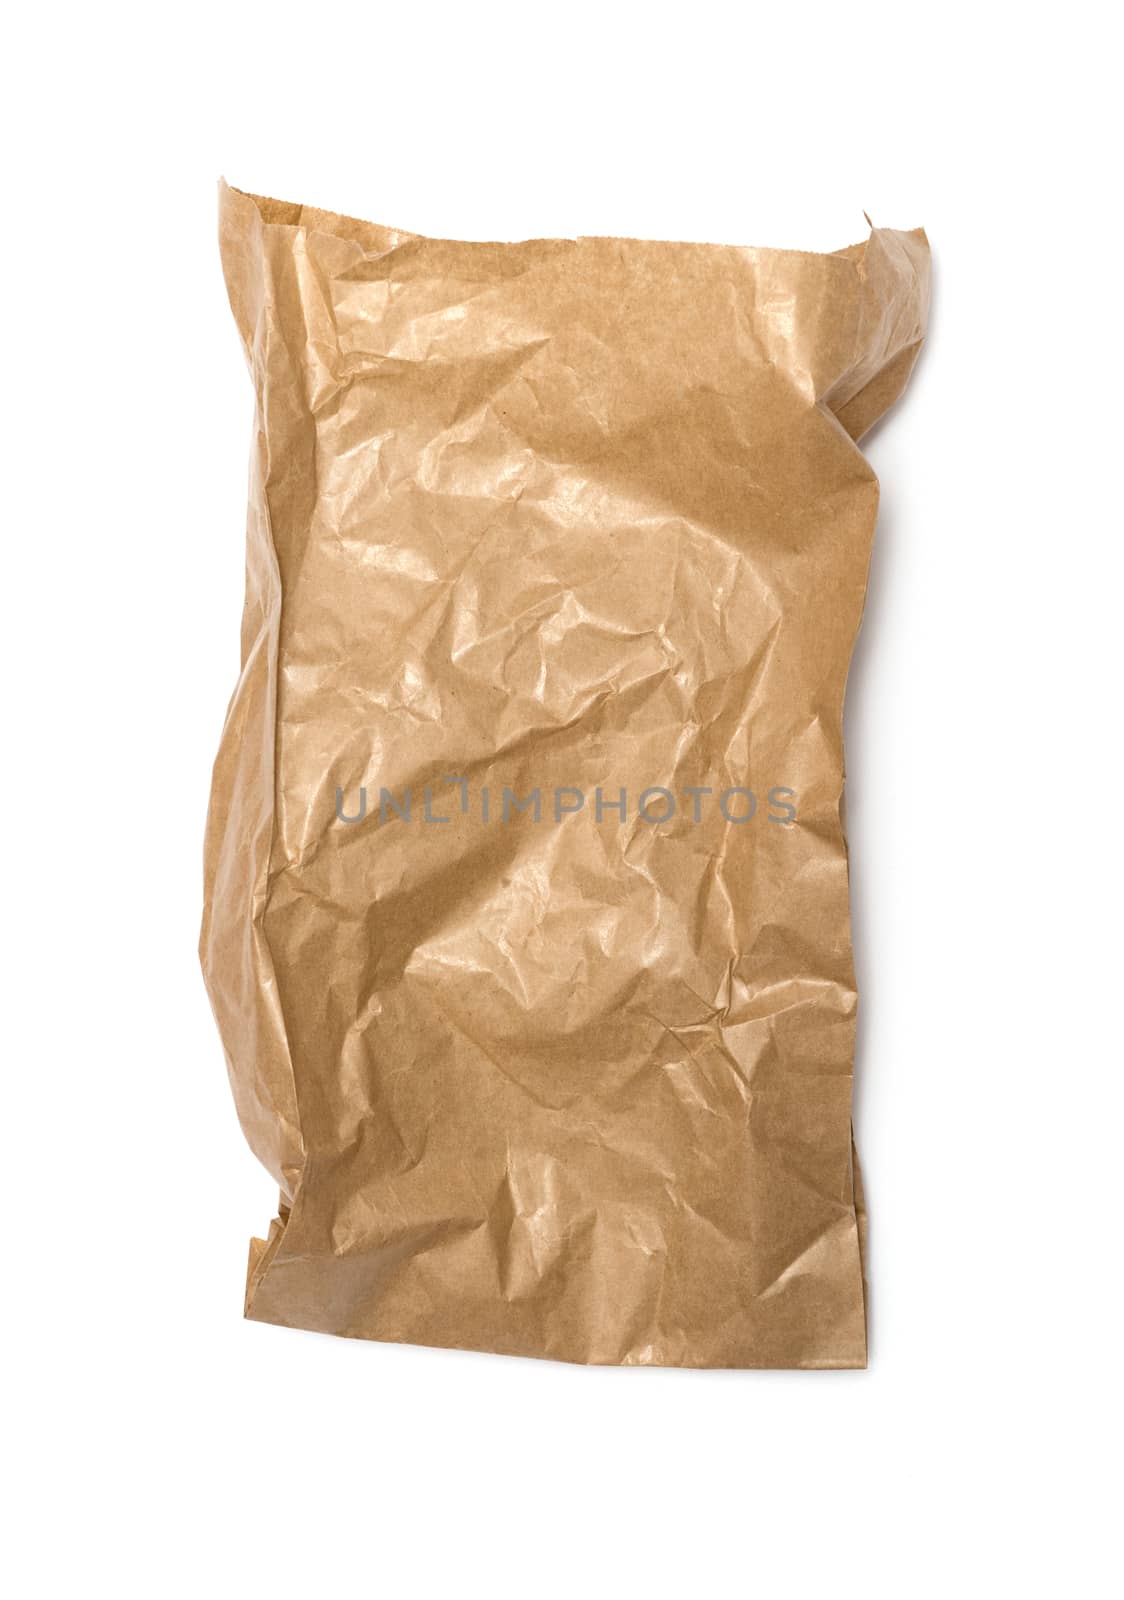 Crumpled paper bag with grease spots isolated on white by DNKSTUDIO